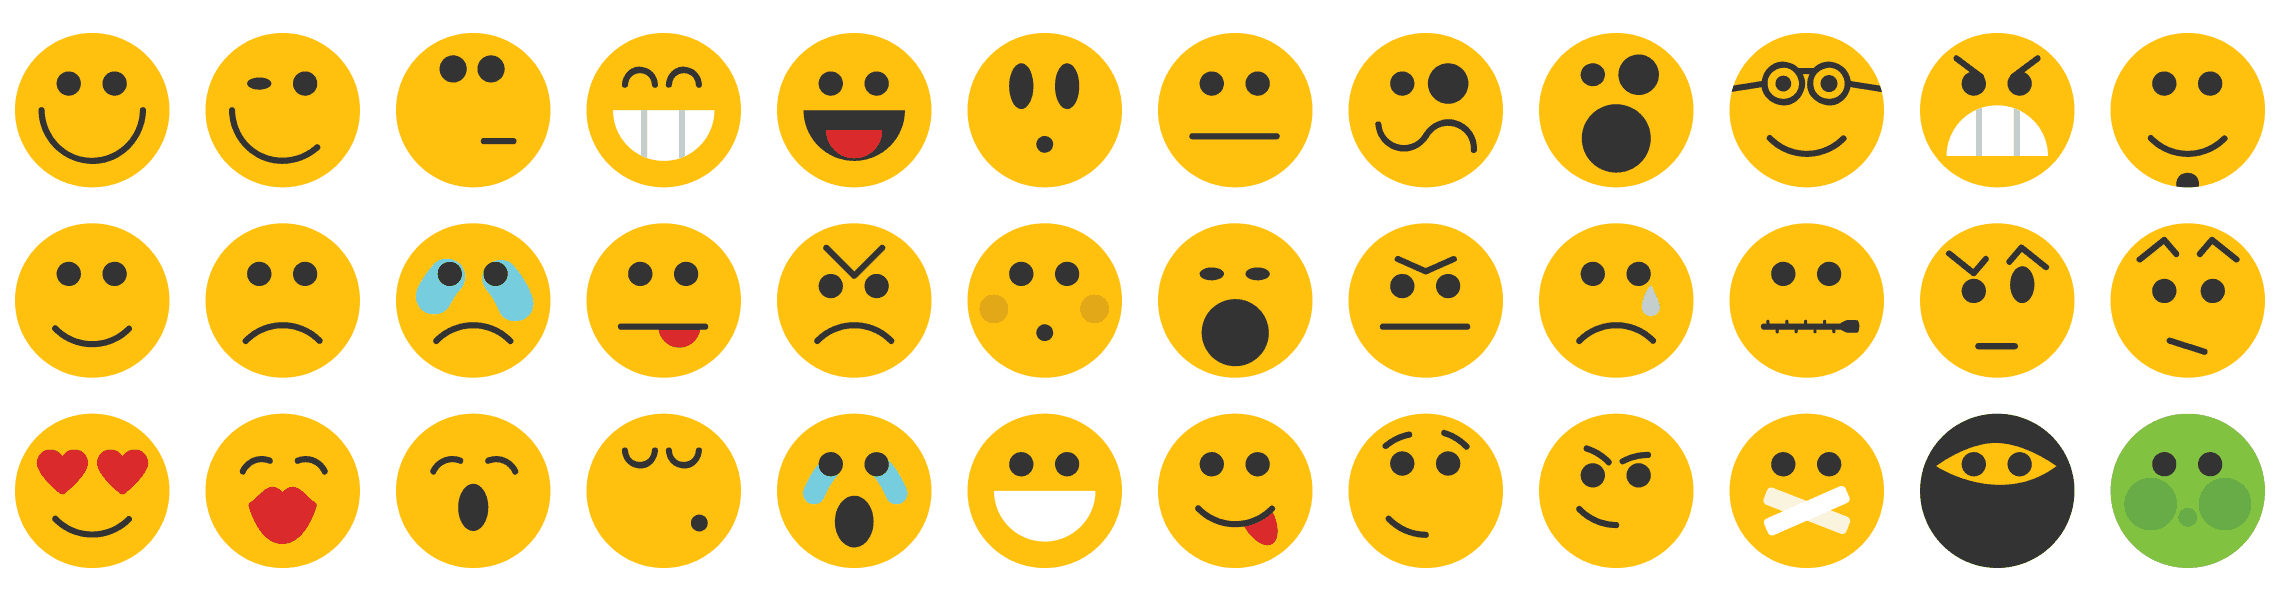 emoticons-flat-icons-vol-1-preview